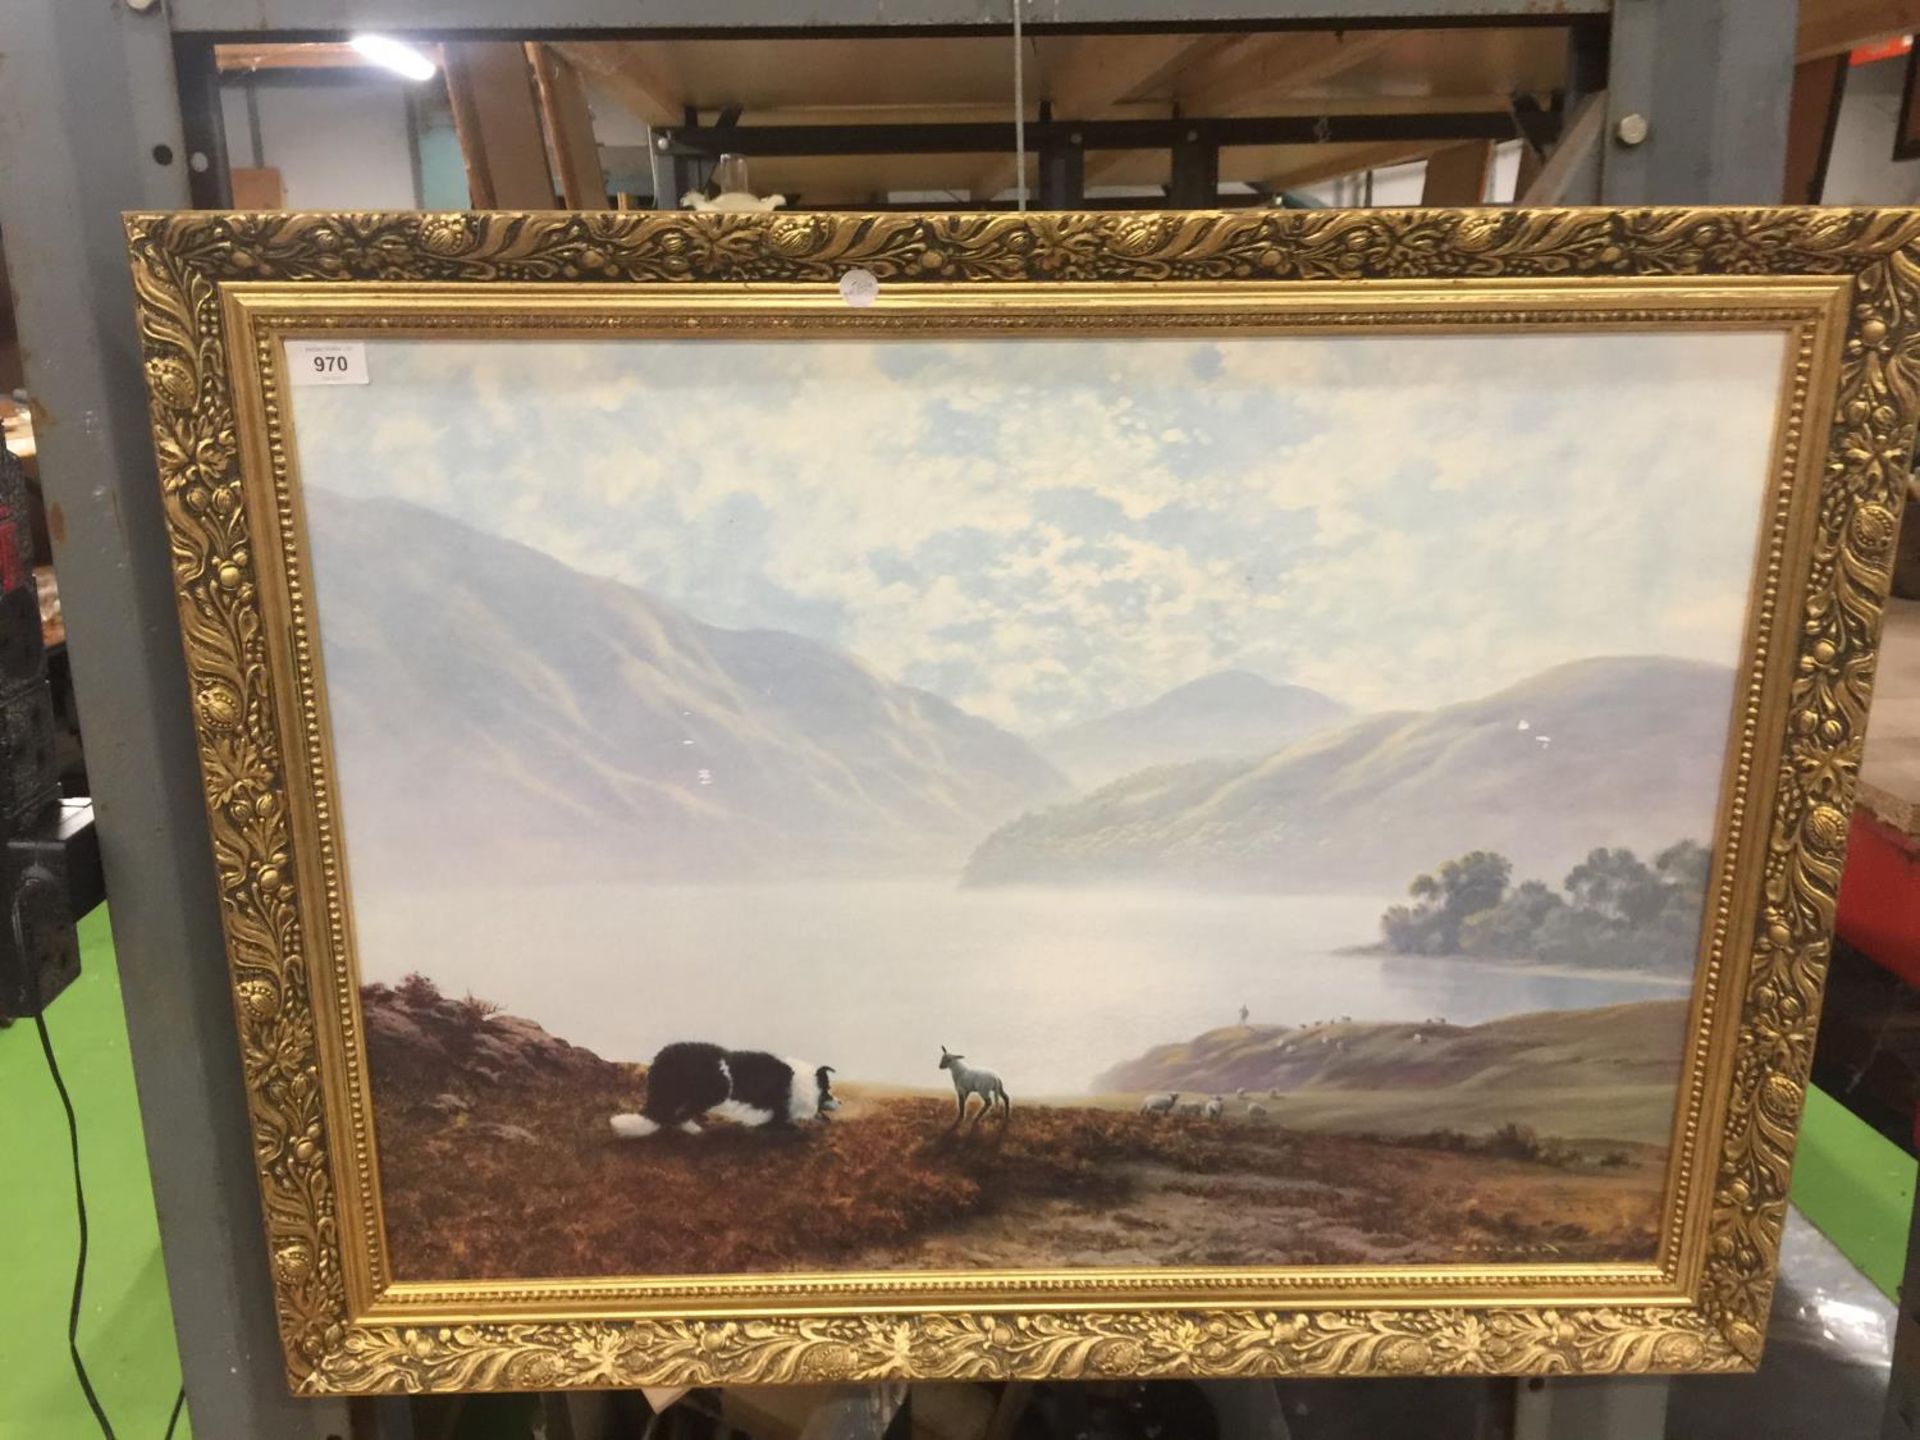 A LARGE GILT FRAMED PRINT OF A SHEEPDOG ROUNDING UP SHEEP IN A LAKELAND SETTING